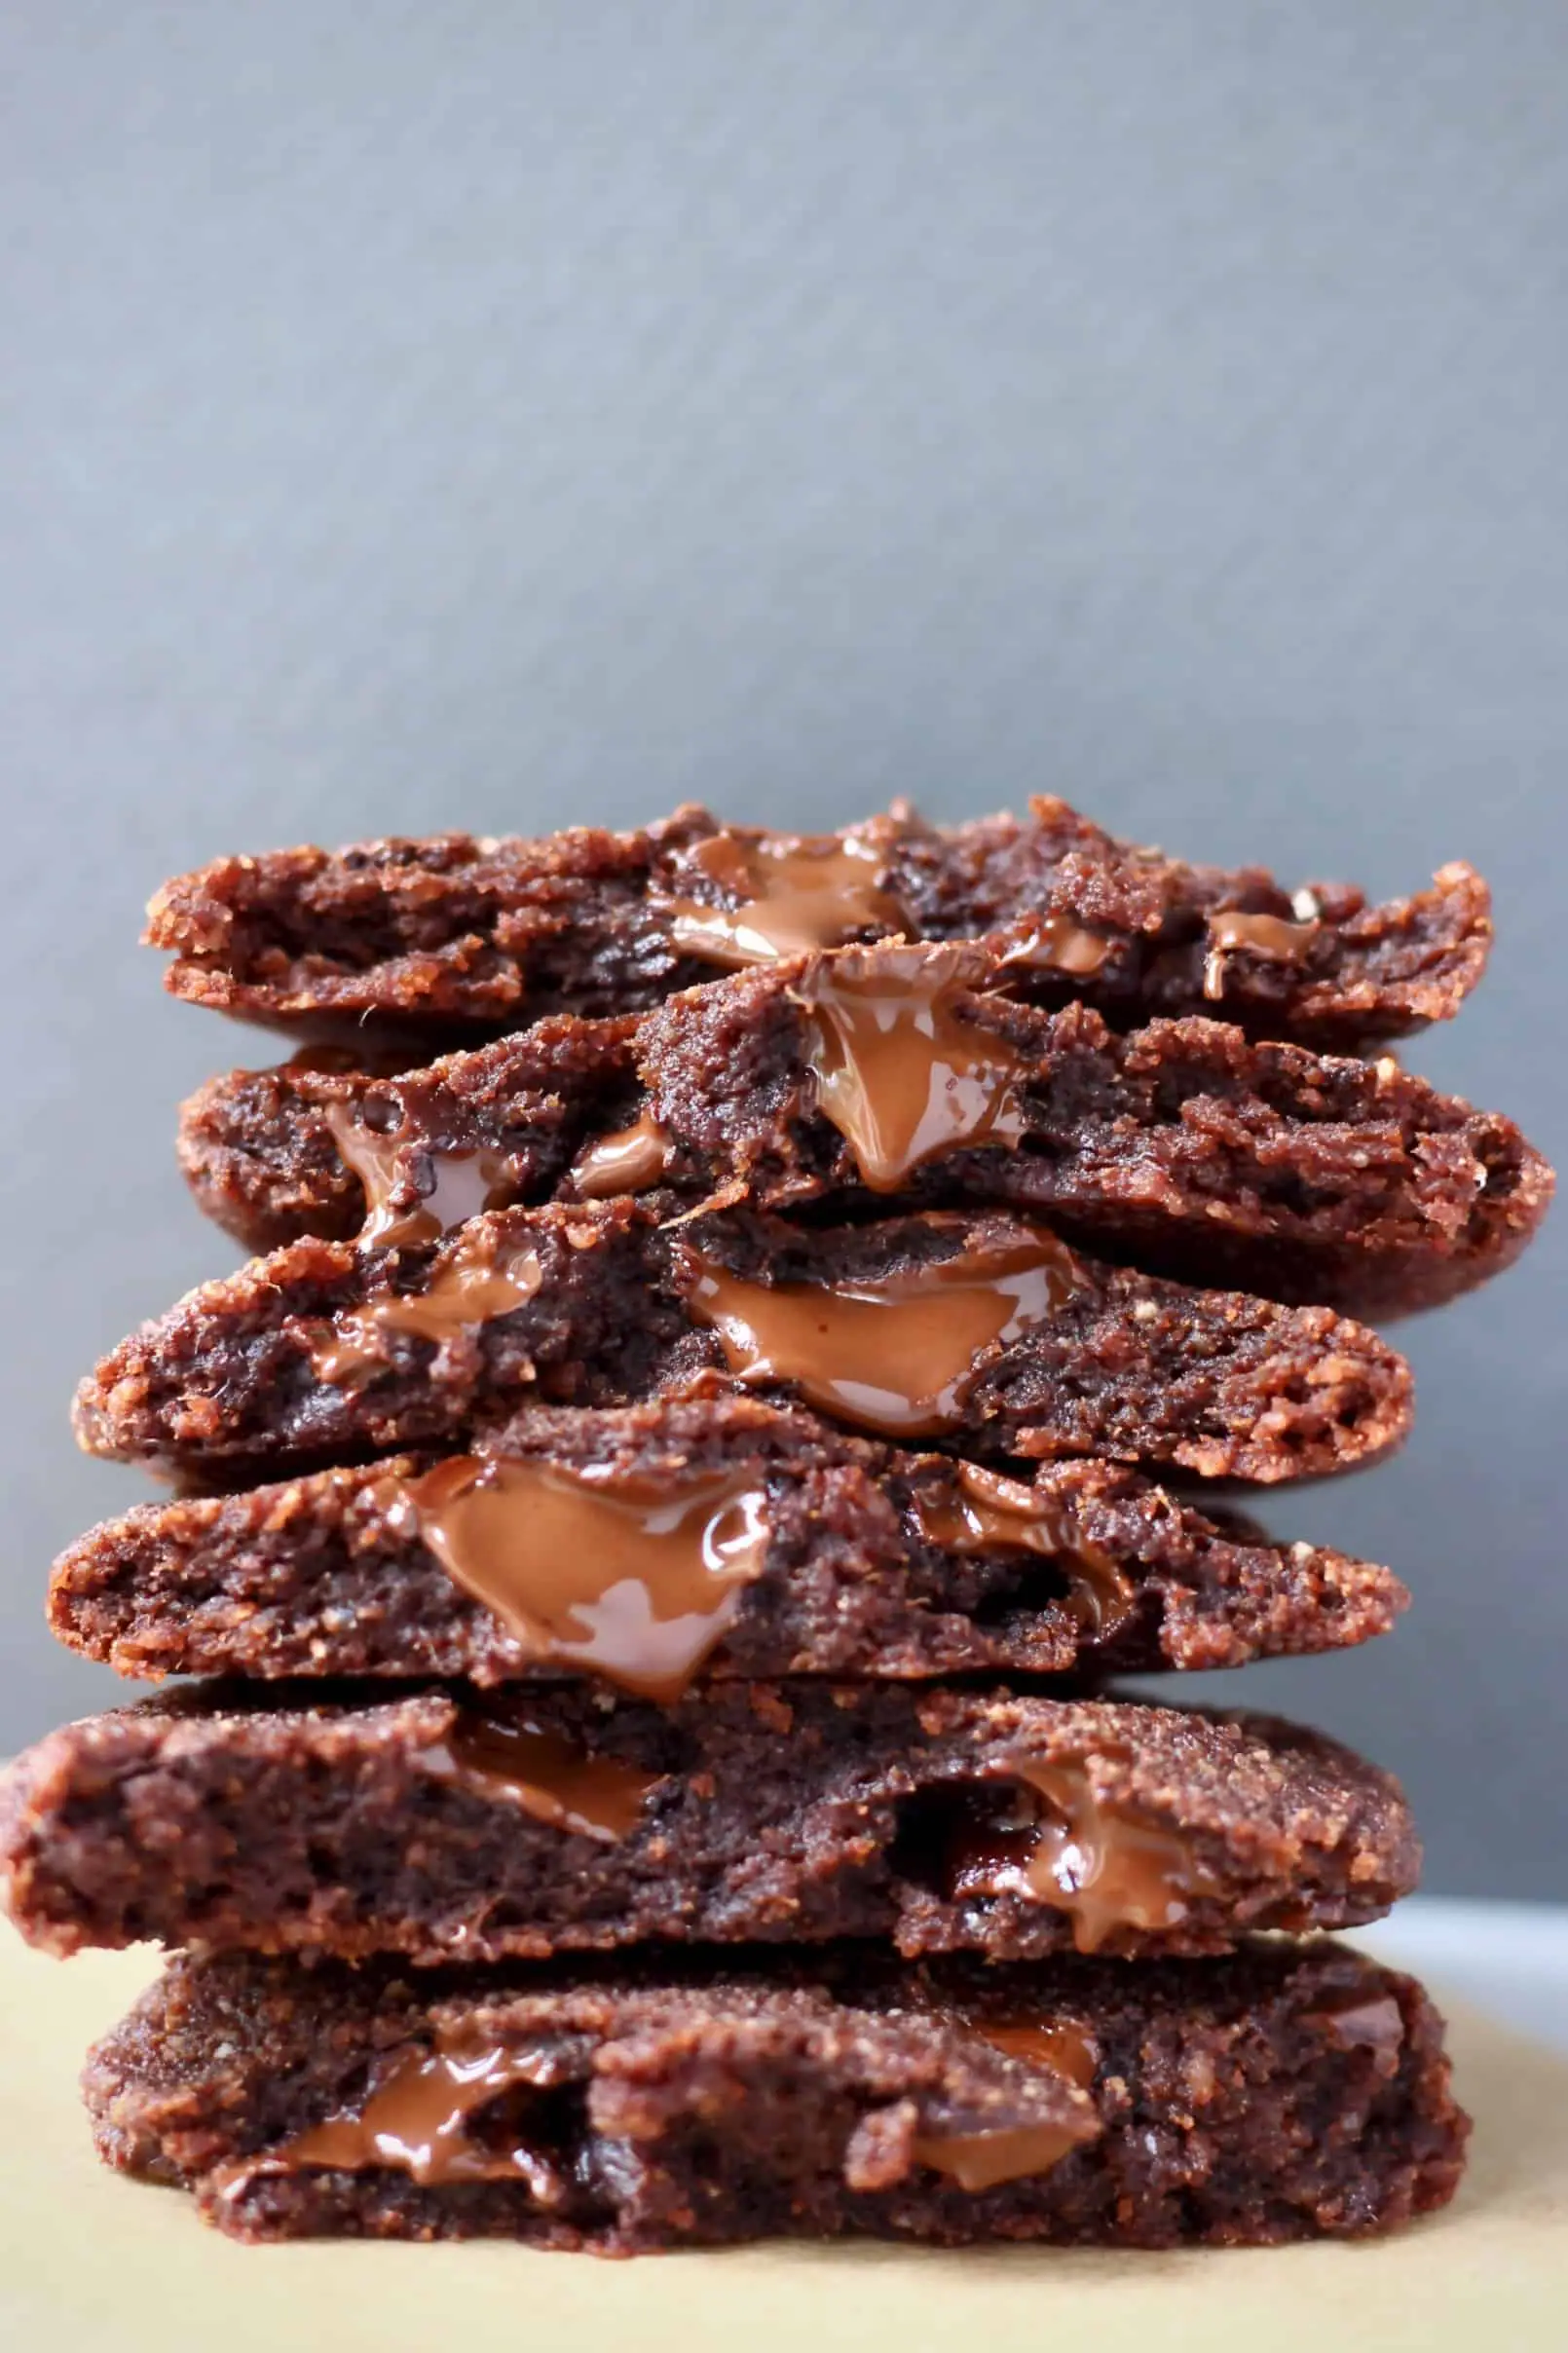 A stack of halved chocolate cookies against a grey background